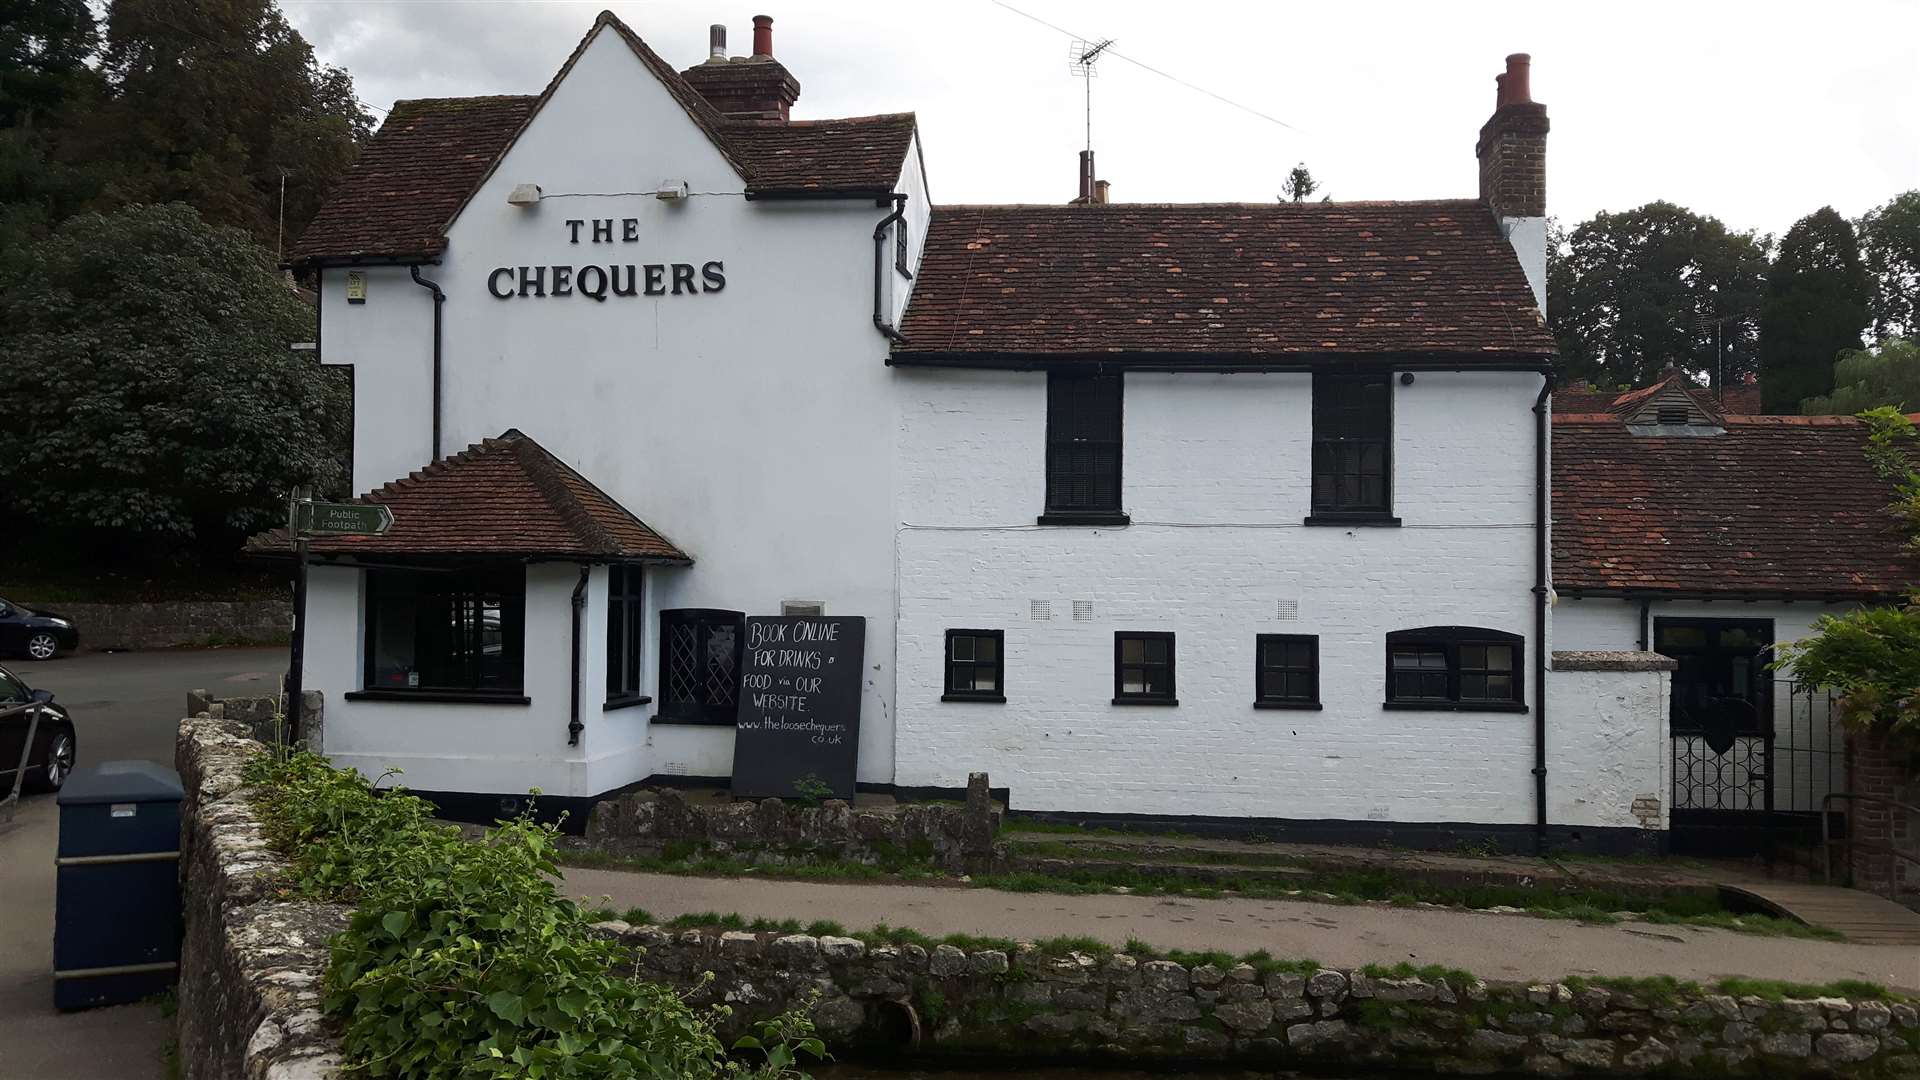 The Chequers pub in Loose